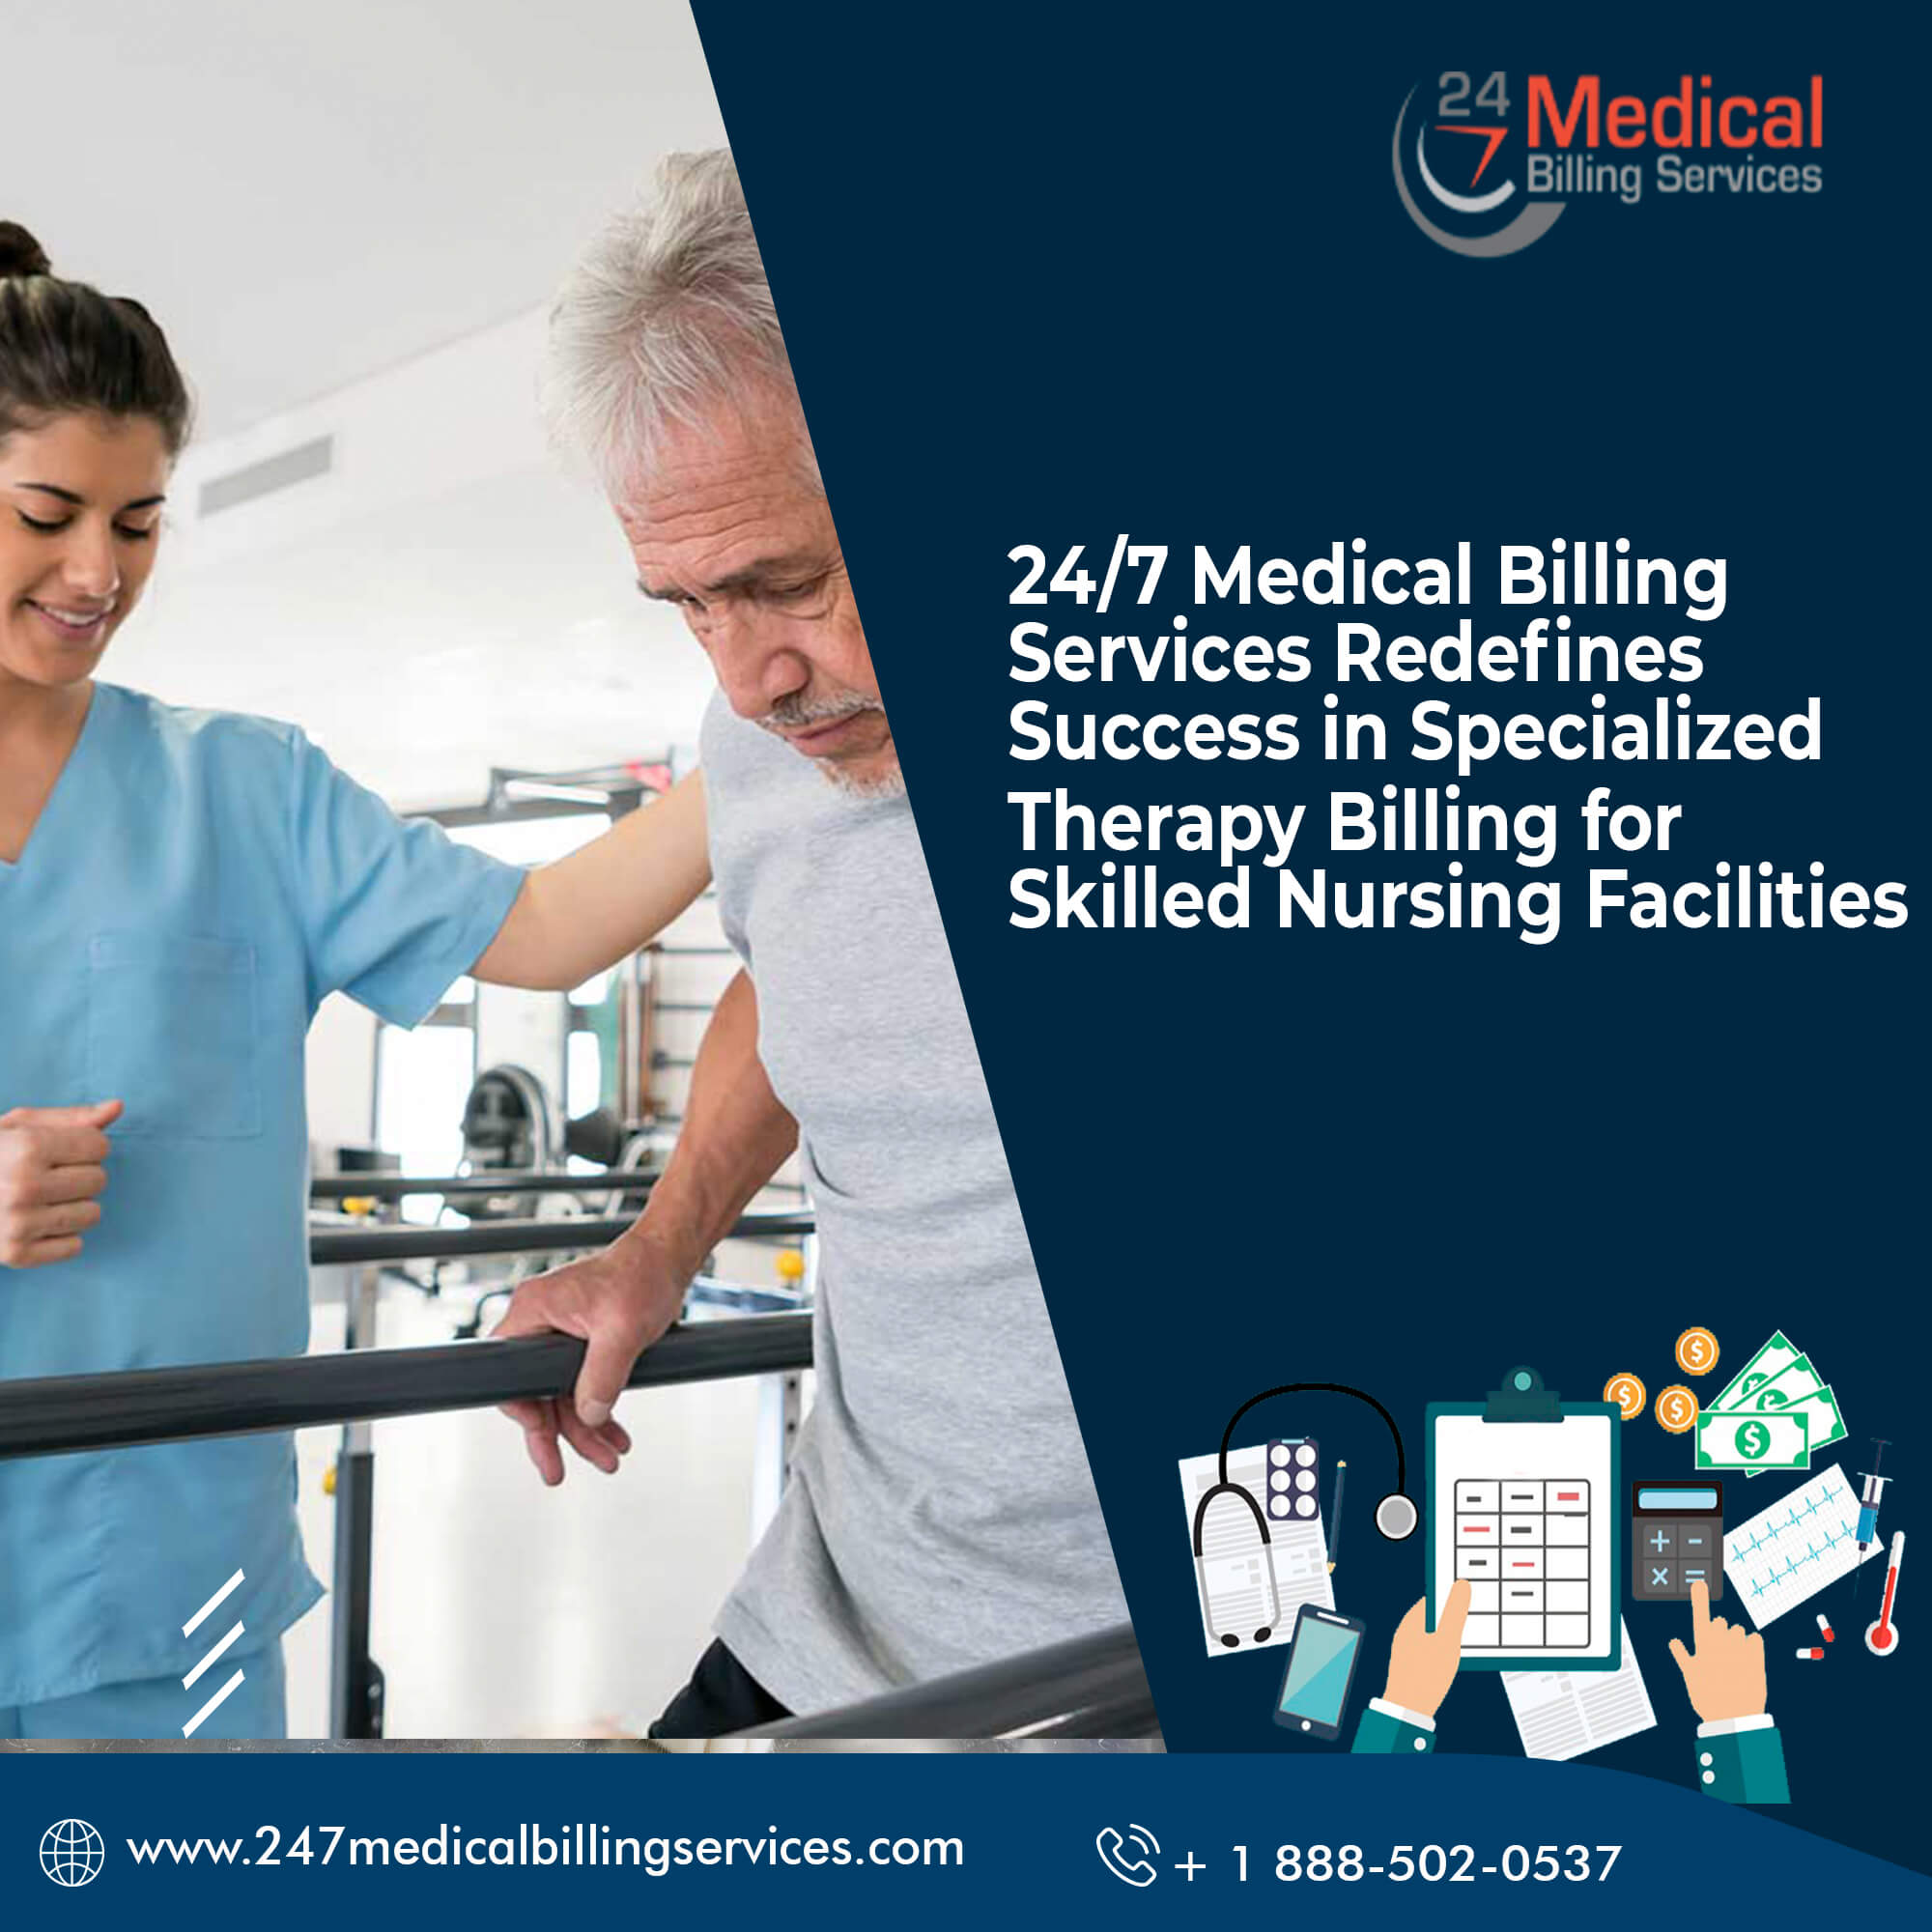  Leading the Way: 24/7 Medical Billing Services Redefines Success in Specialized Therapy Billing for Skilled Nursing Facilities